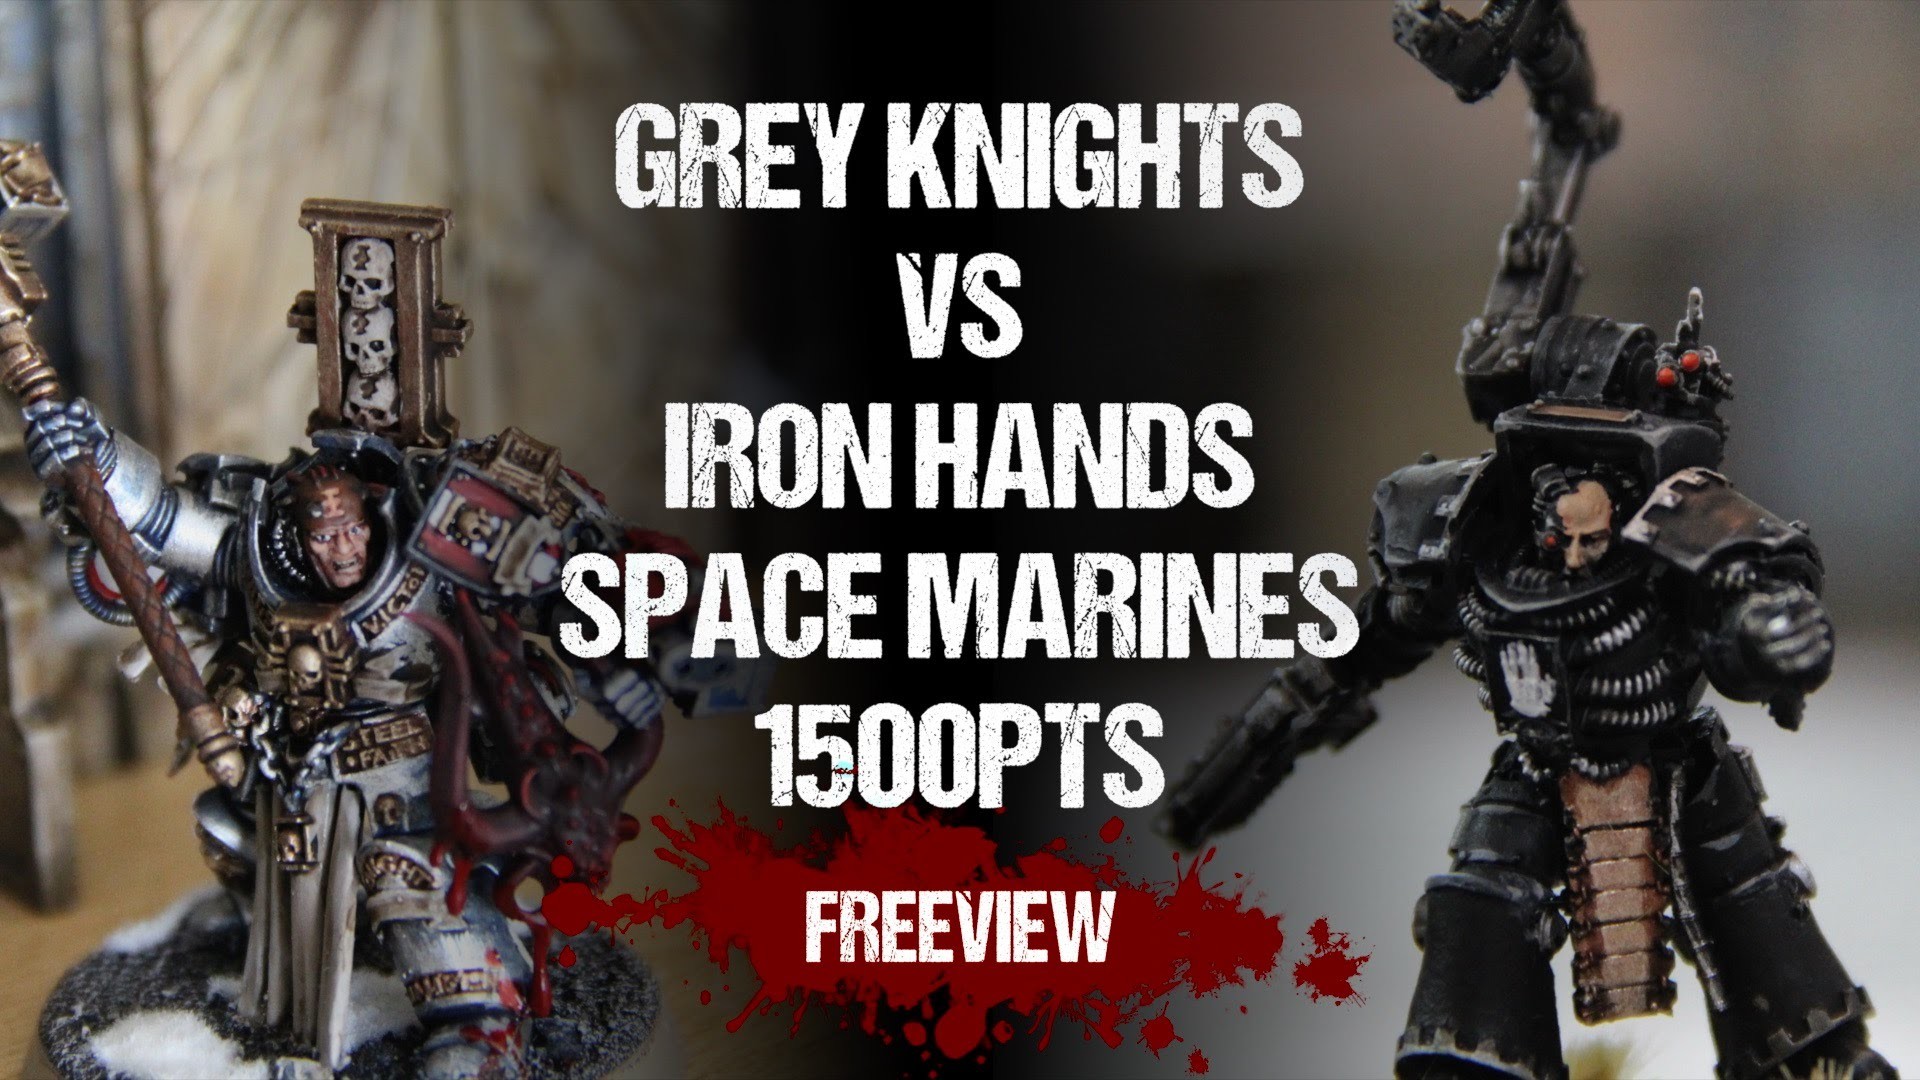 1920x1080 Warhammer 40,000 Battle Report: Grey Knights vs Iron Hands Space Marines  1500pts - YouTube